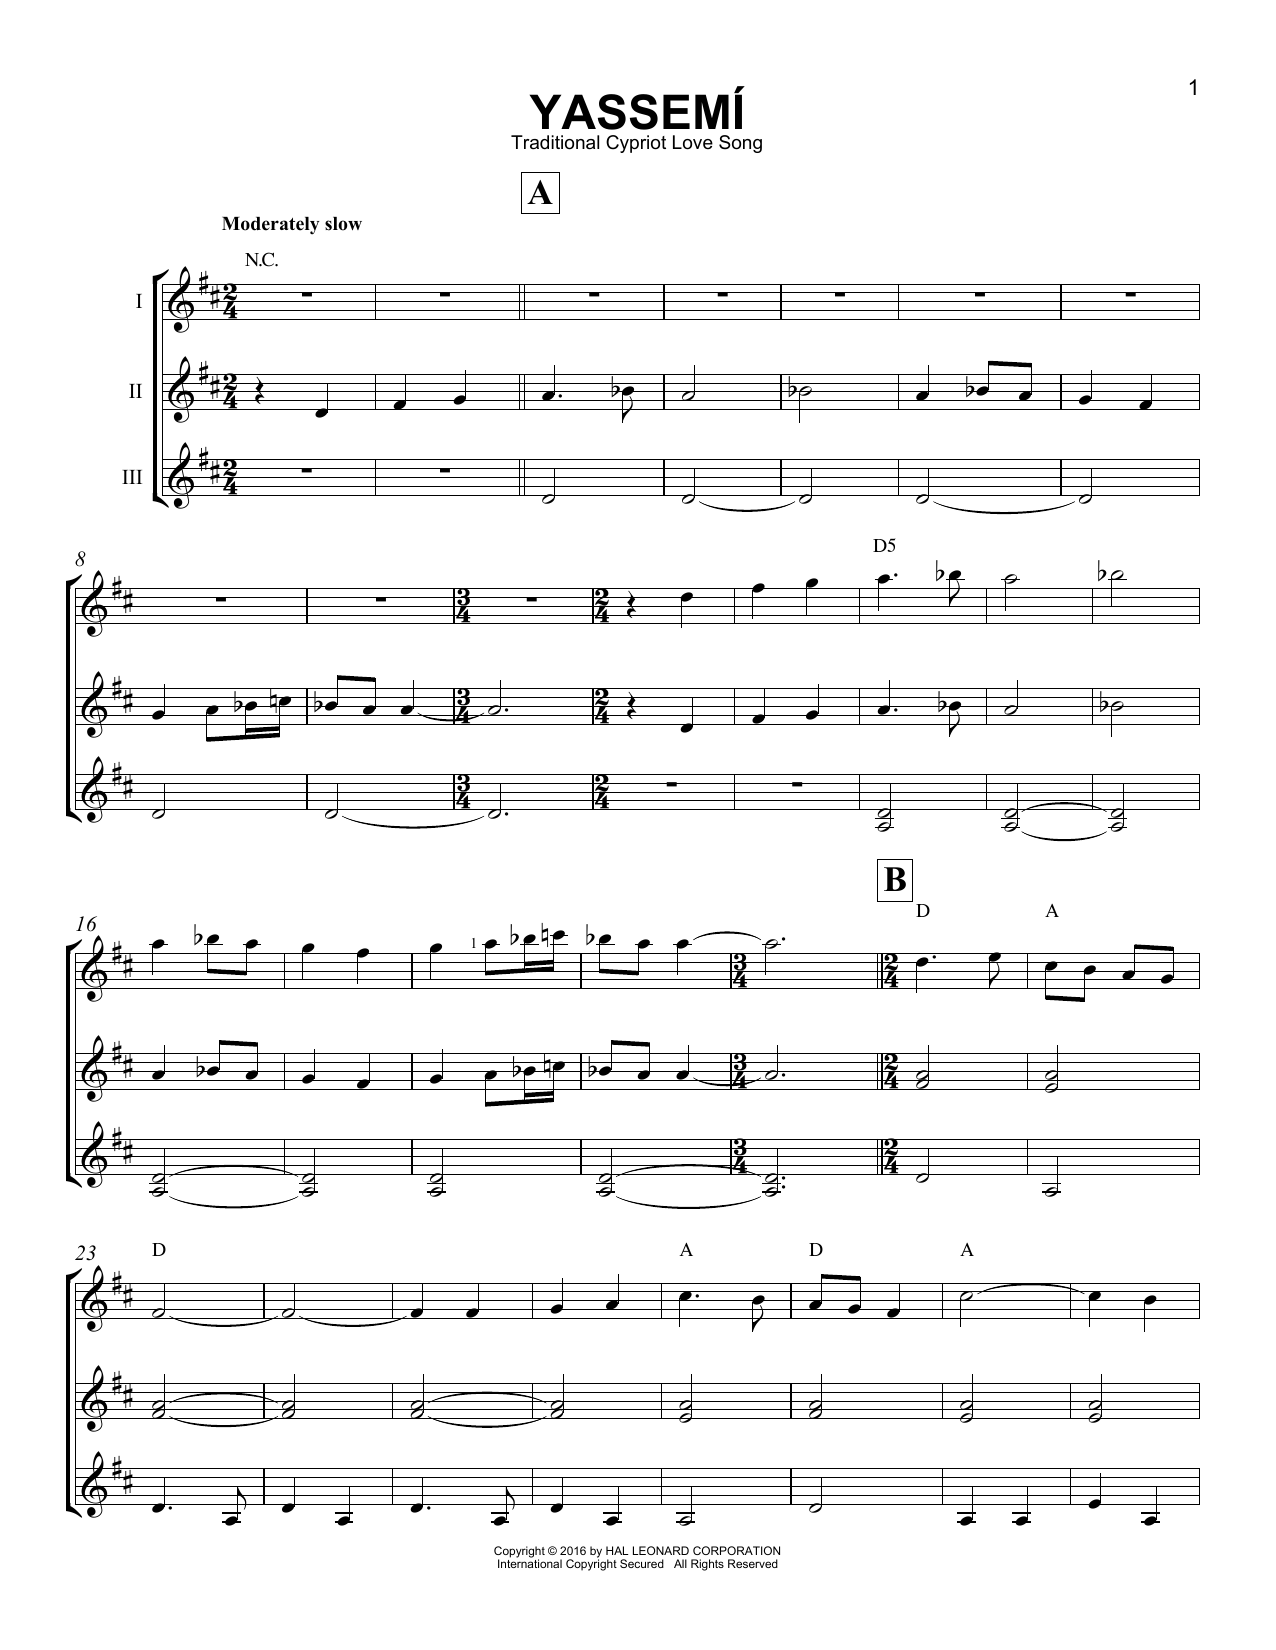 Download Traditional Cypriot Love Song Yassemi Sheet Music